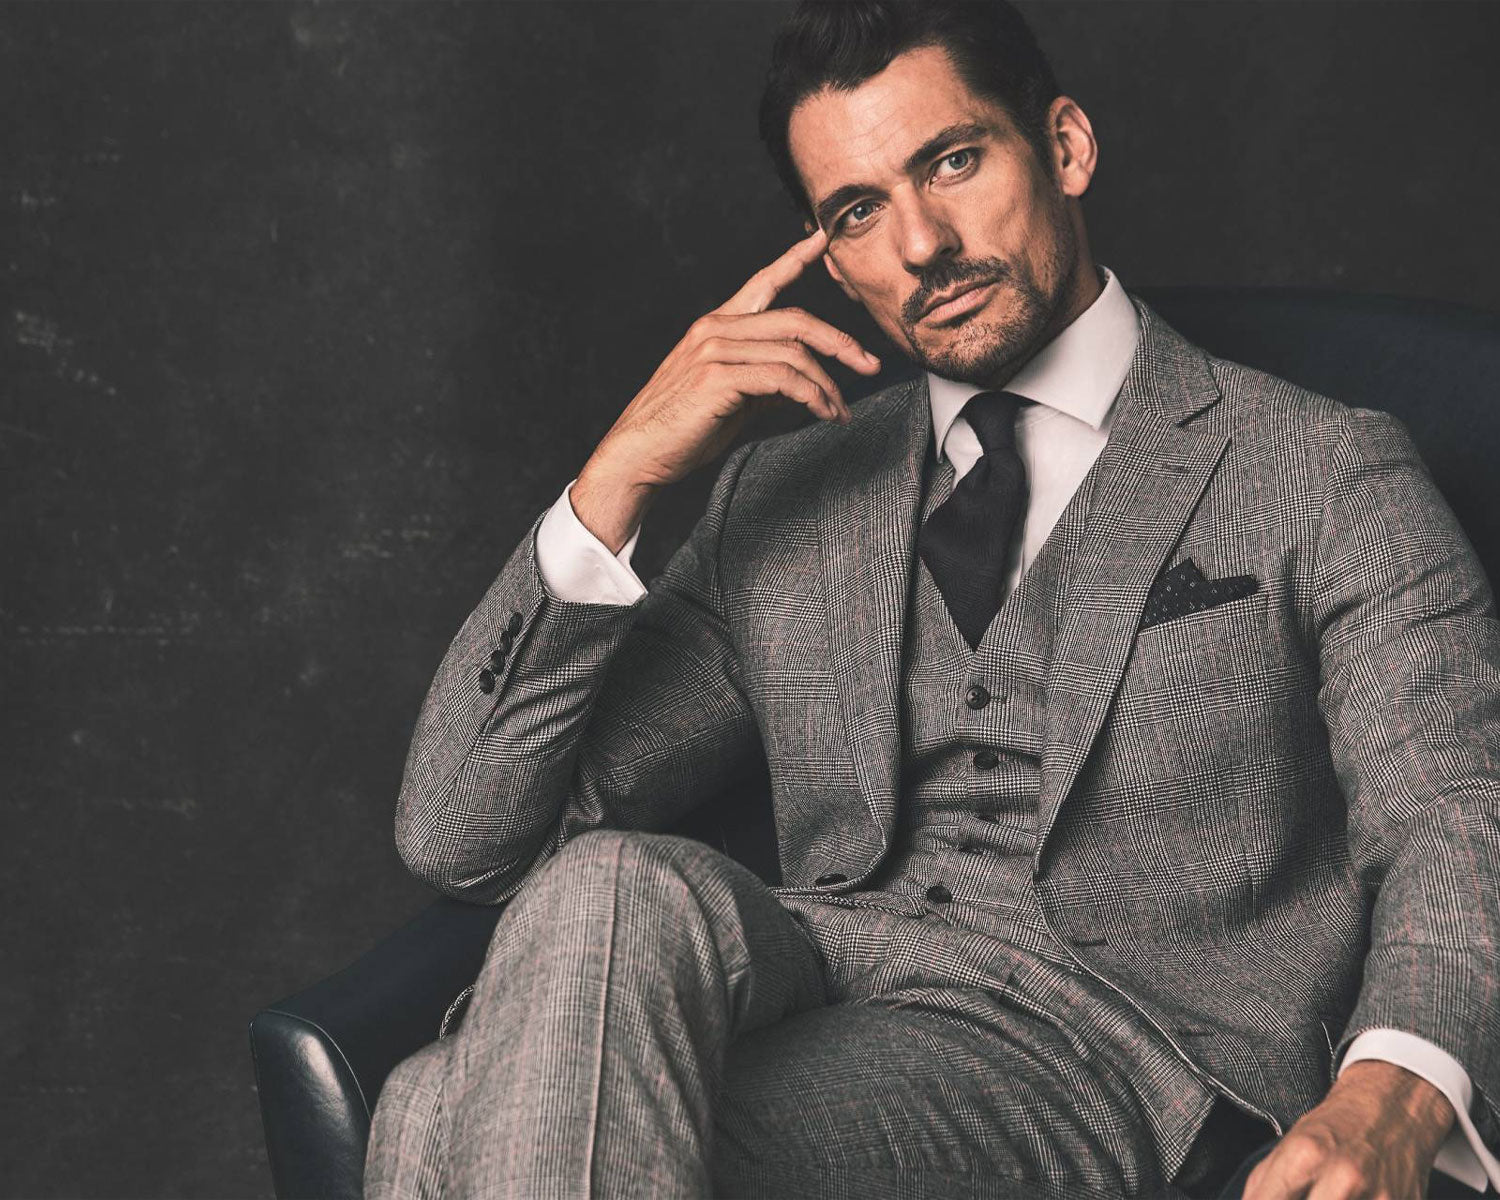 Refining Spring Suits for Men so You're in Full Bloom - David Gandy